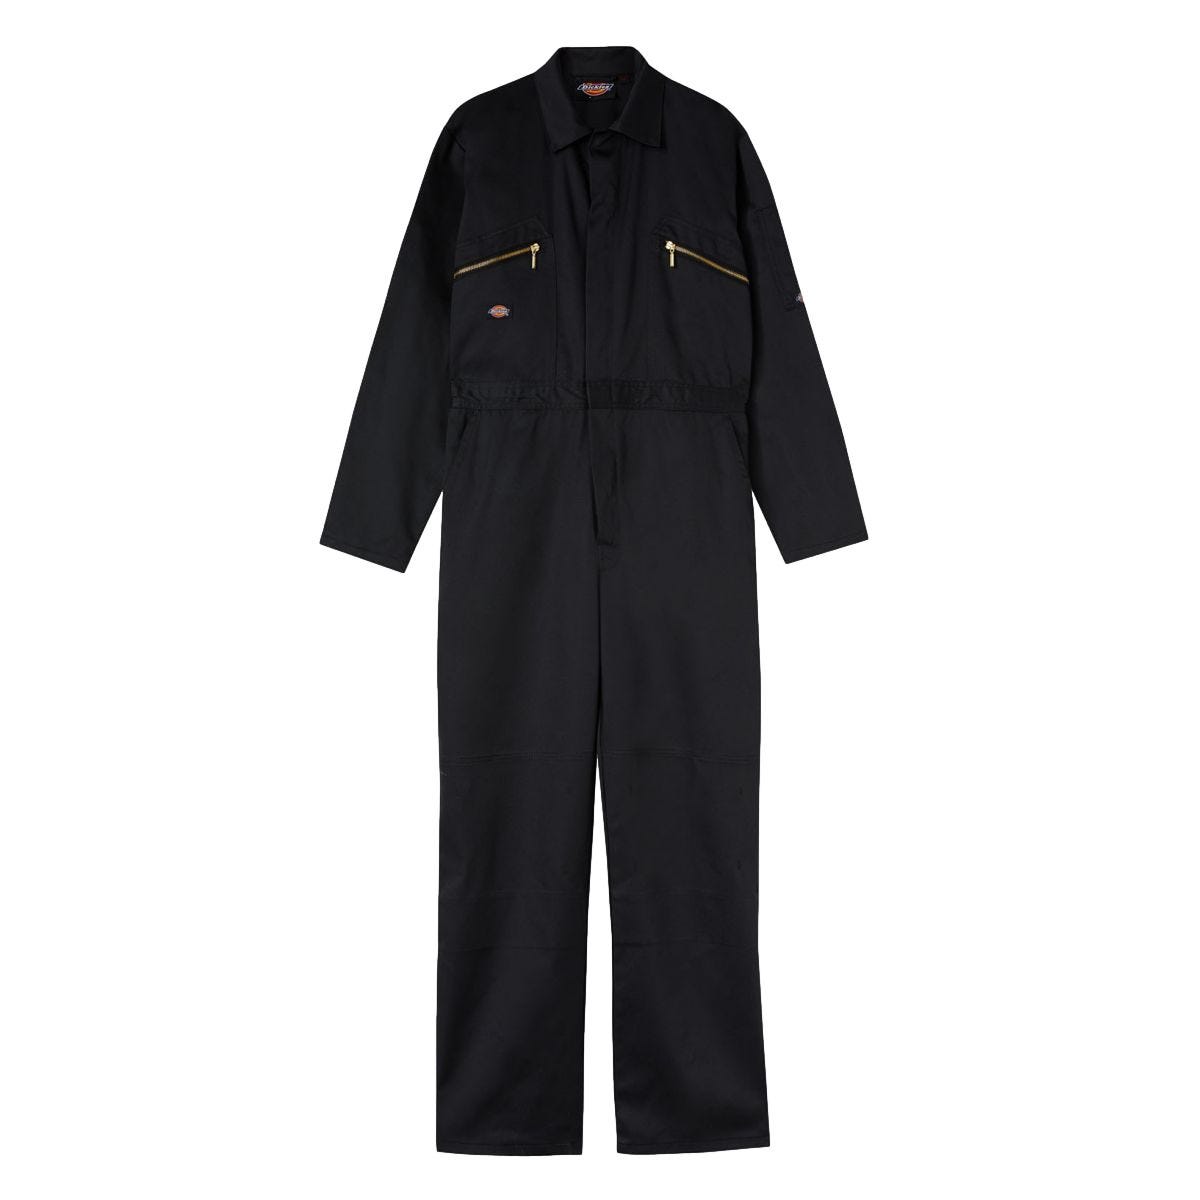 Combinaison Redhawk Coverhall Noir - Dickies - Taille 2XL 0